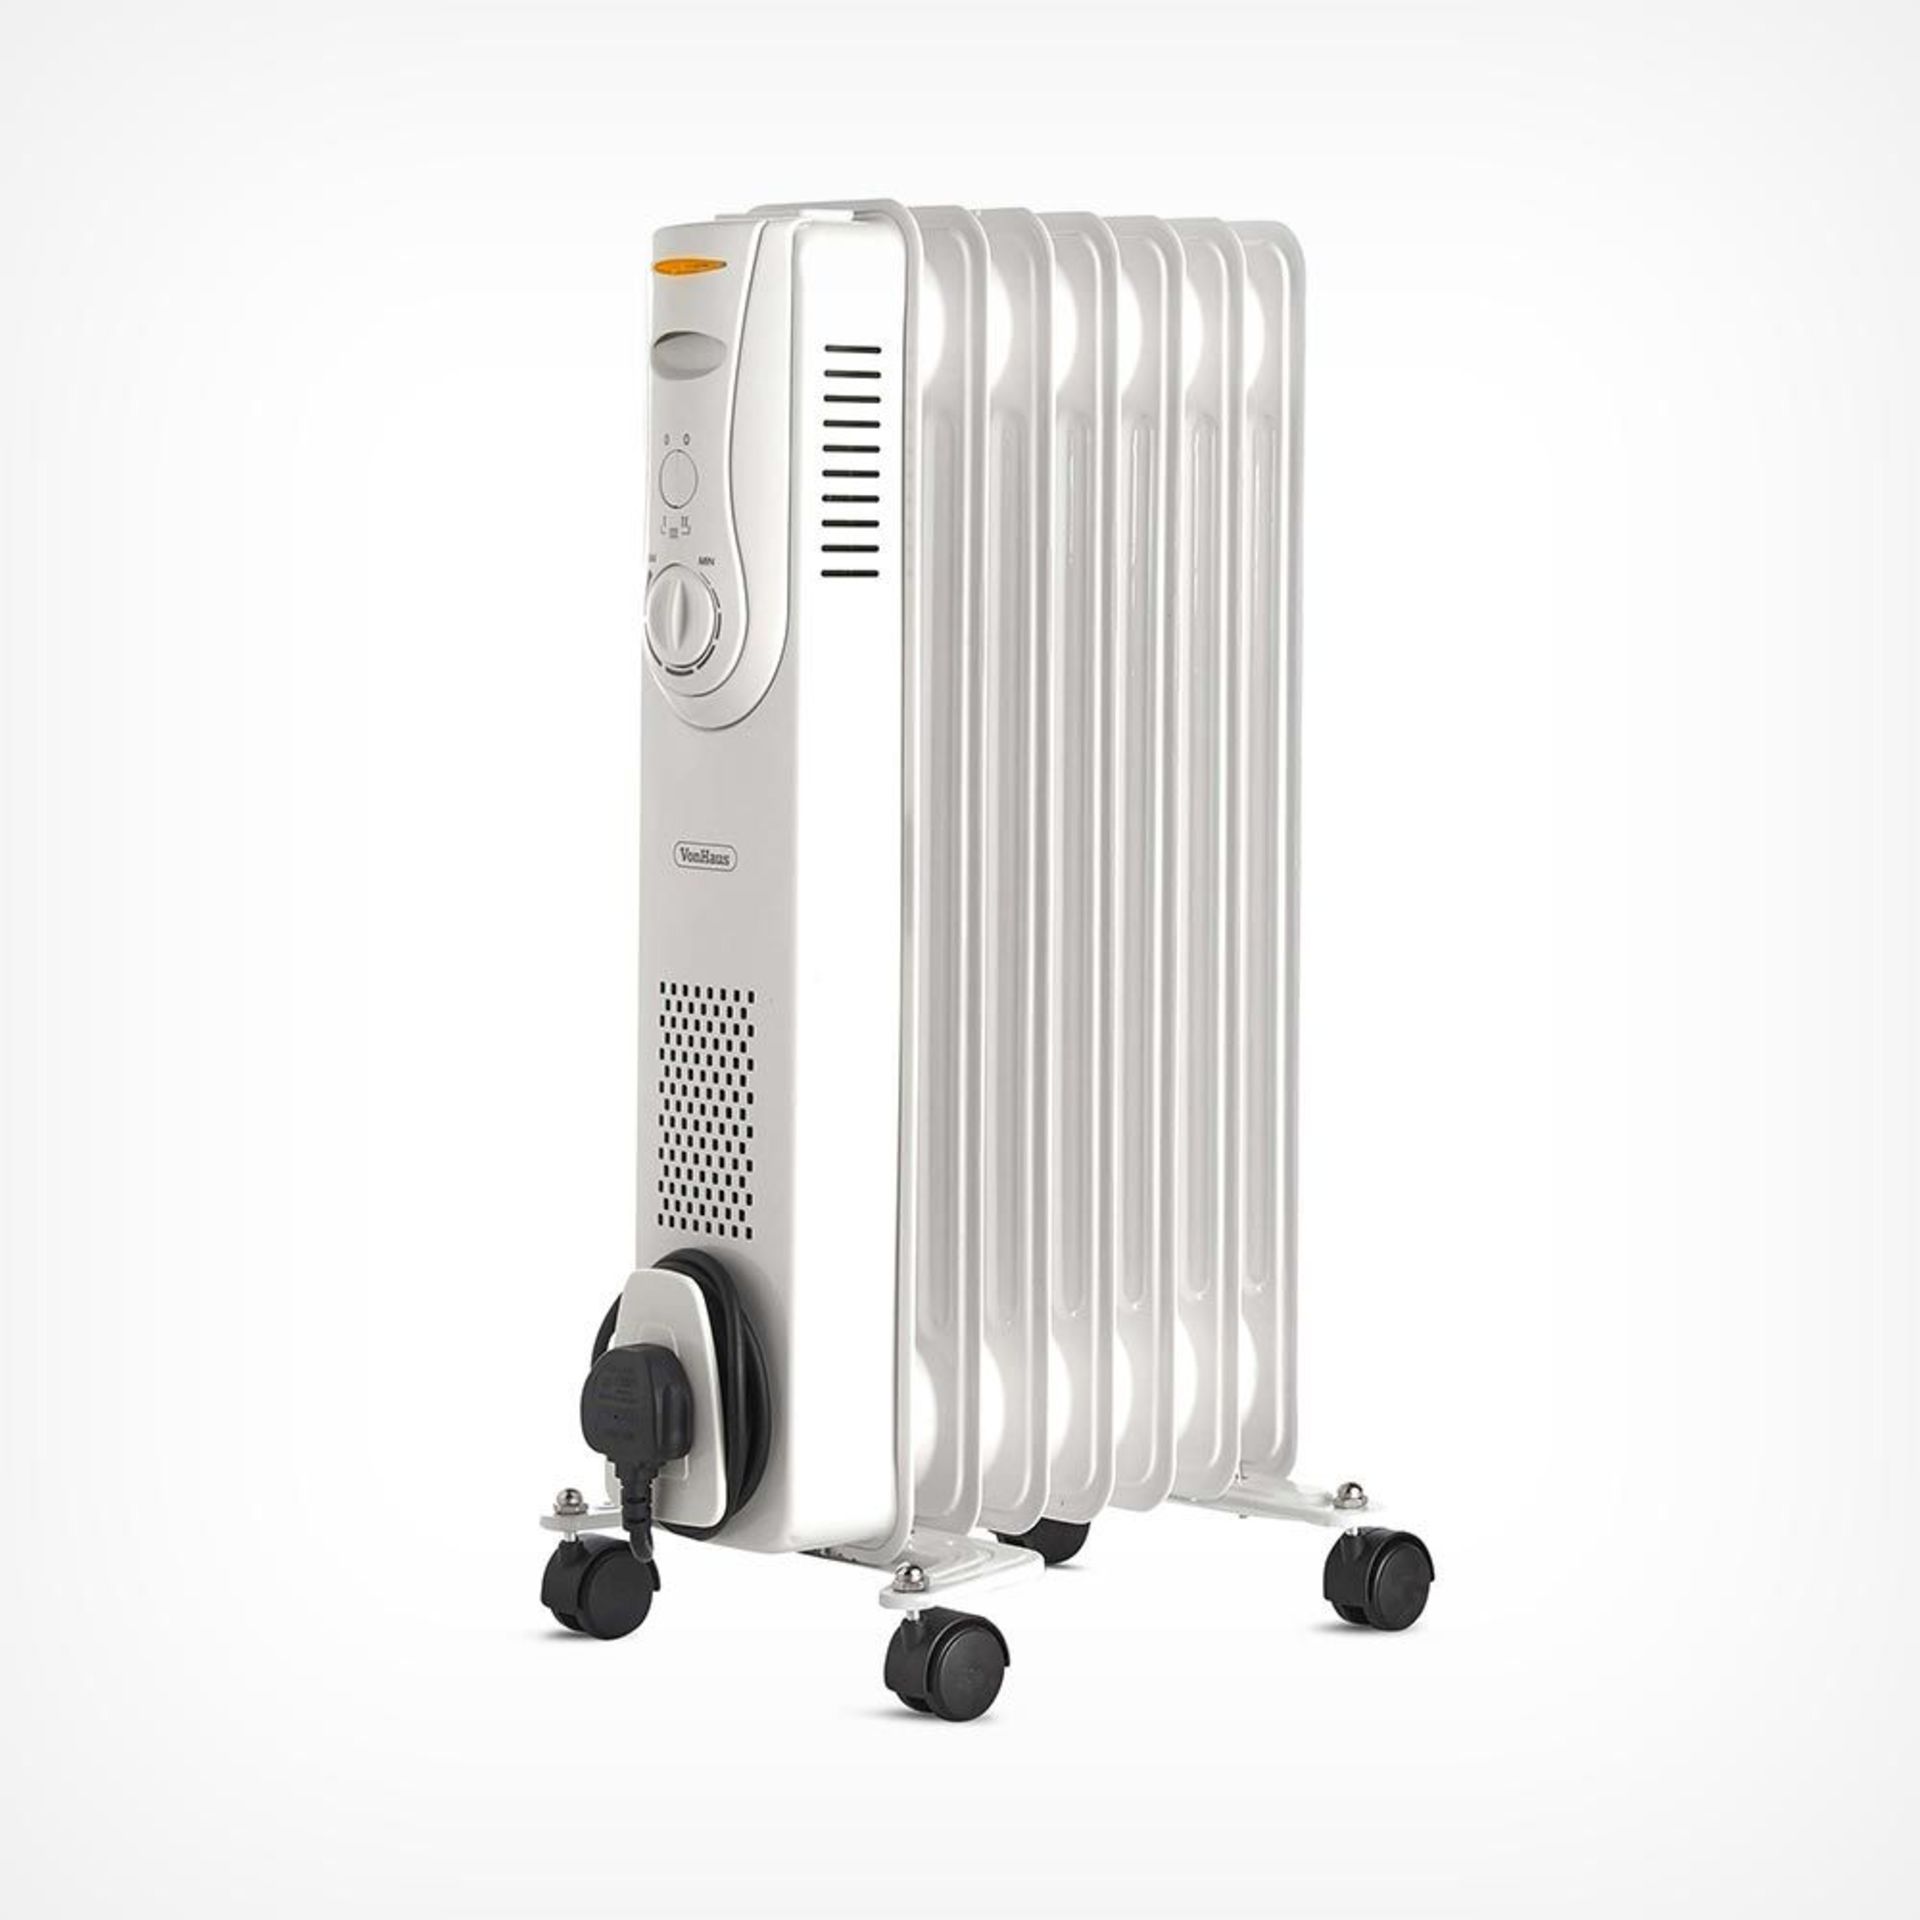 (H66) 7 Fin 1500W Oil Filled Radiator - White Powerful 1500W radiator with 7 oil-filled fins ?... - Image 2 of 2